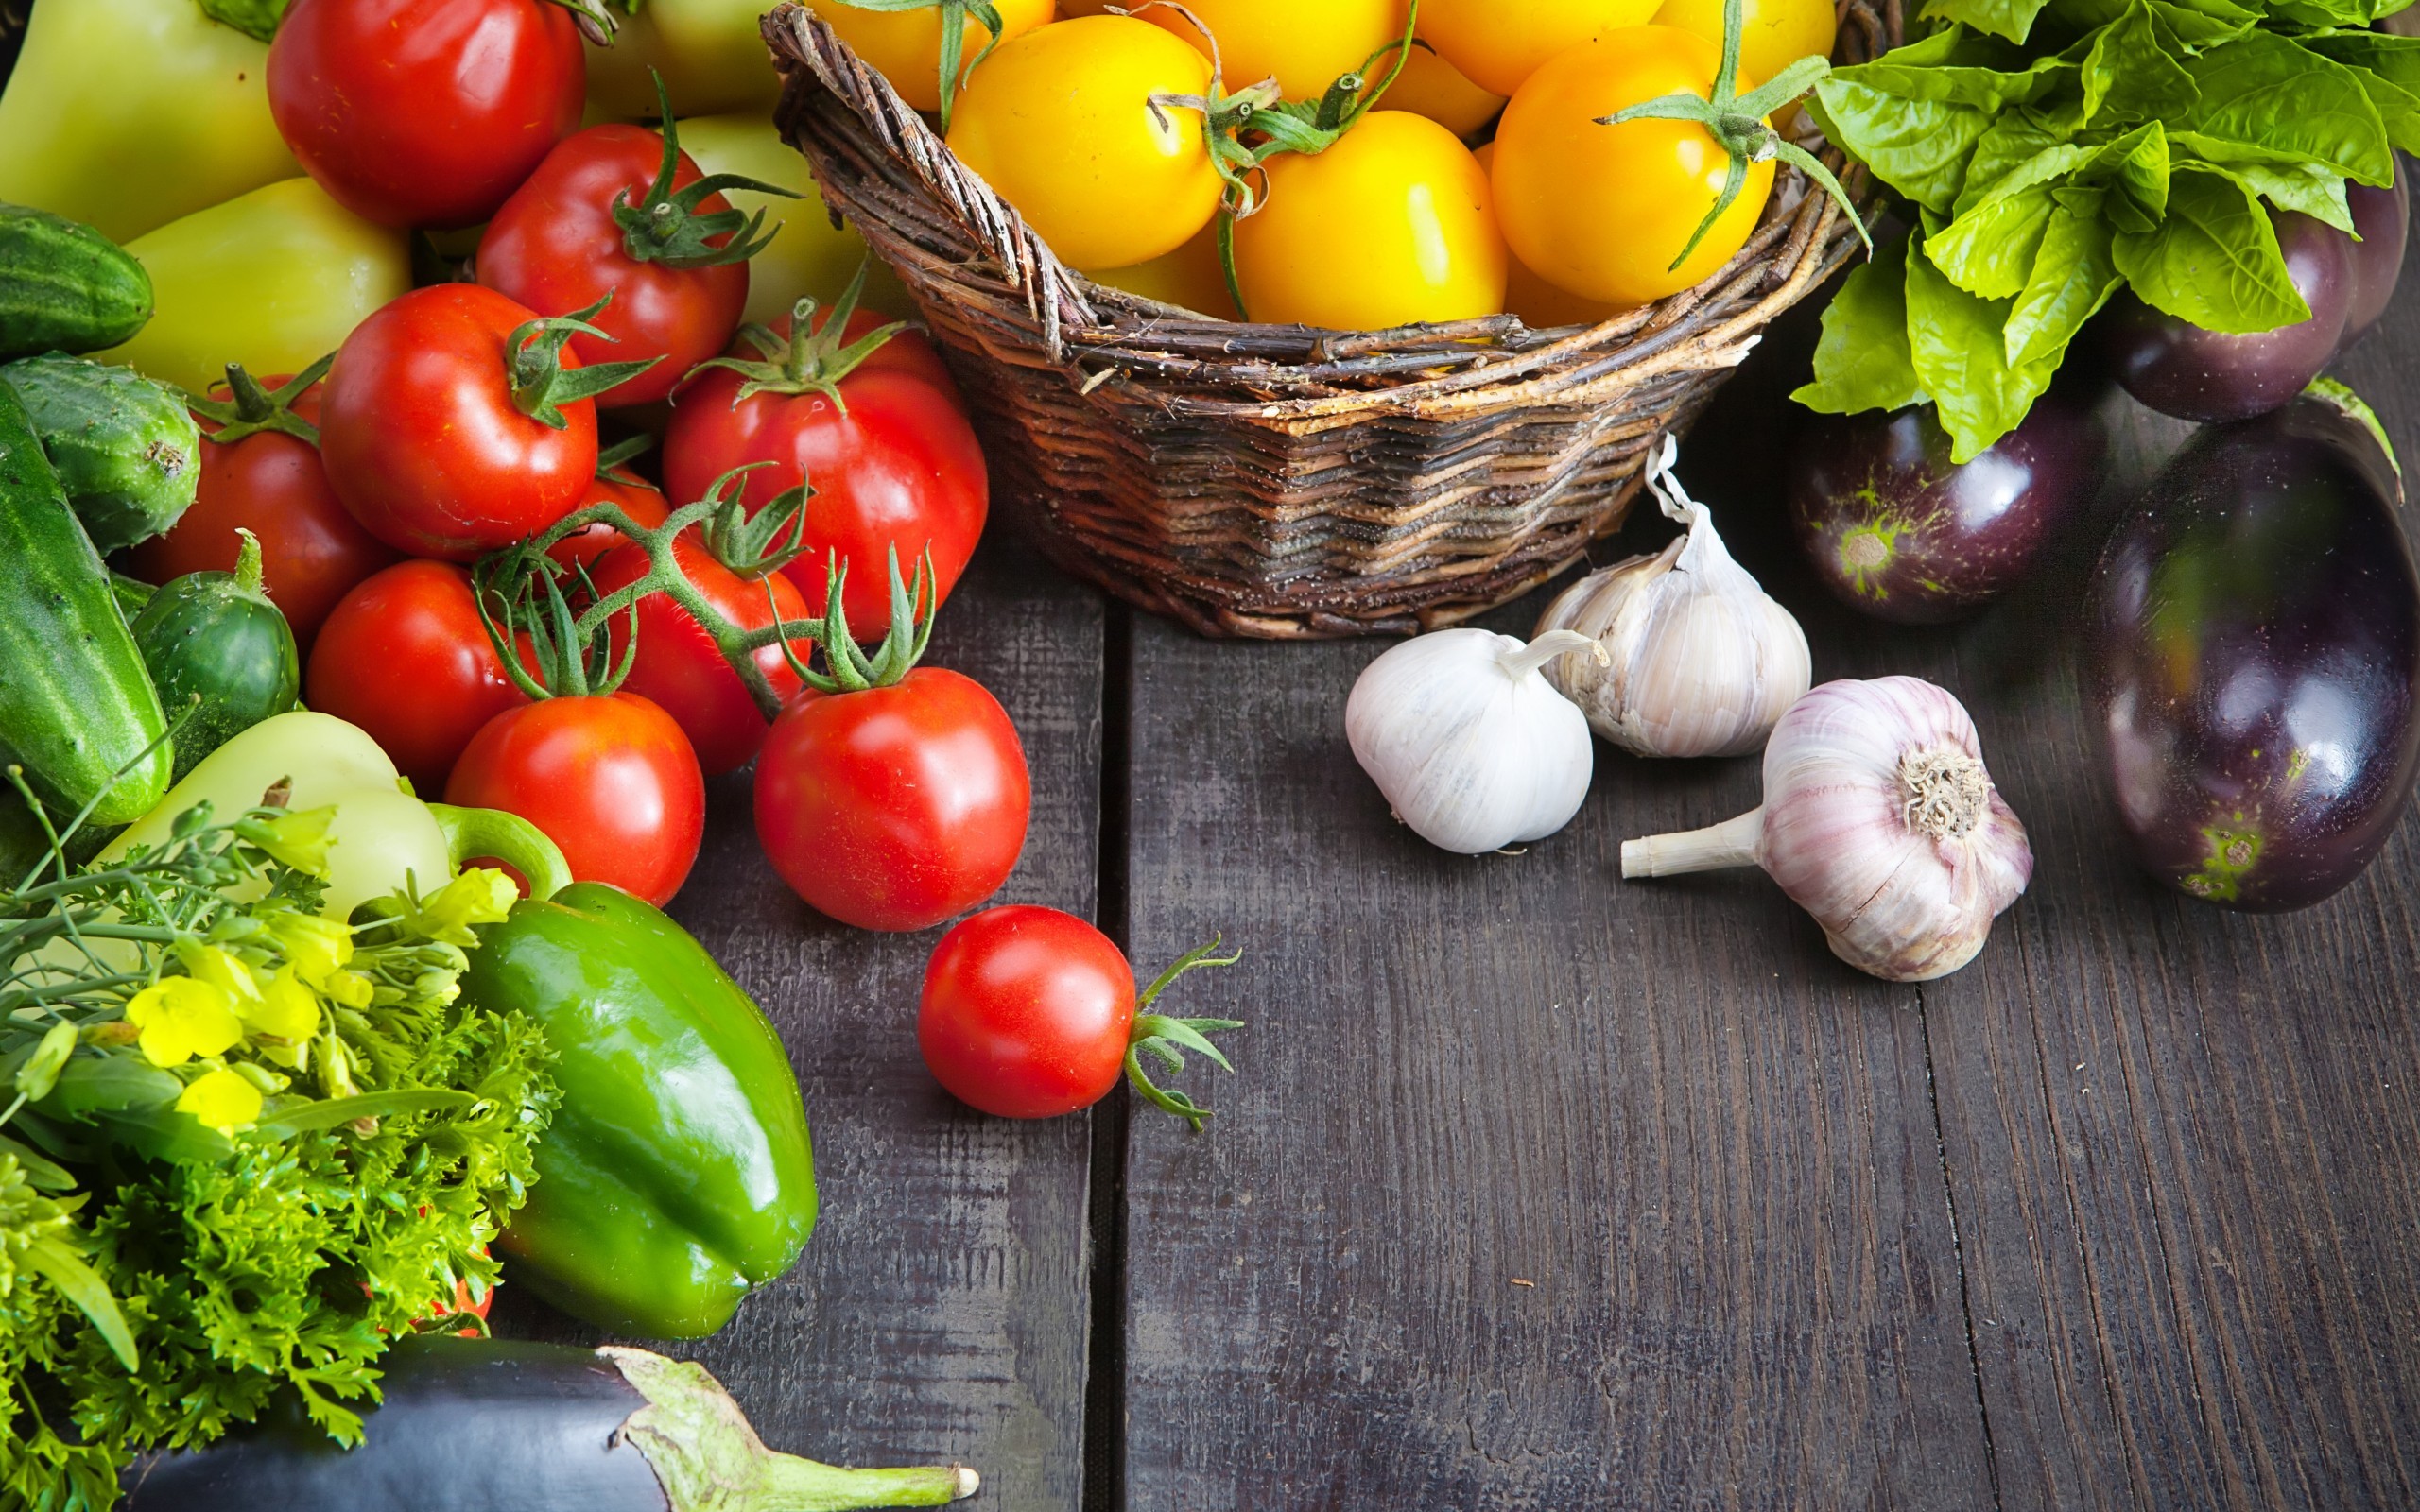 Food Vegetables Tomatoes Eggplant Baskets Wooden Surface Colorful Colorful Garlic 2560x1600